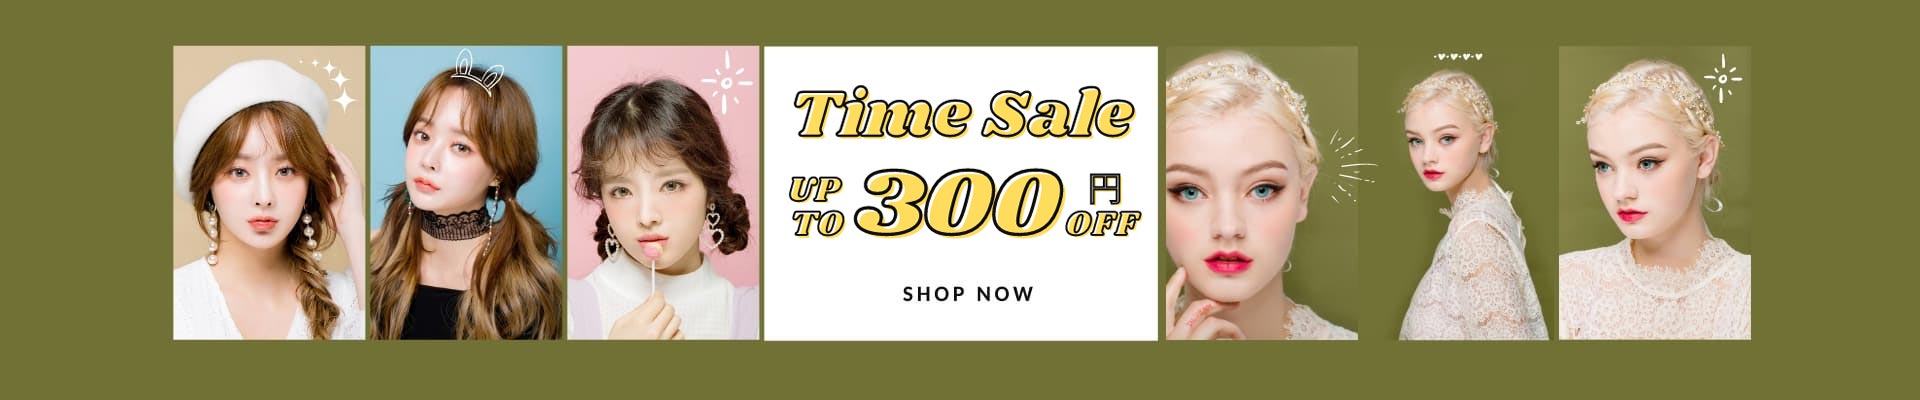 time sale 30% off セール